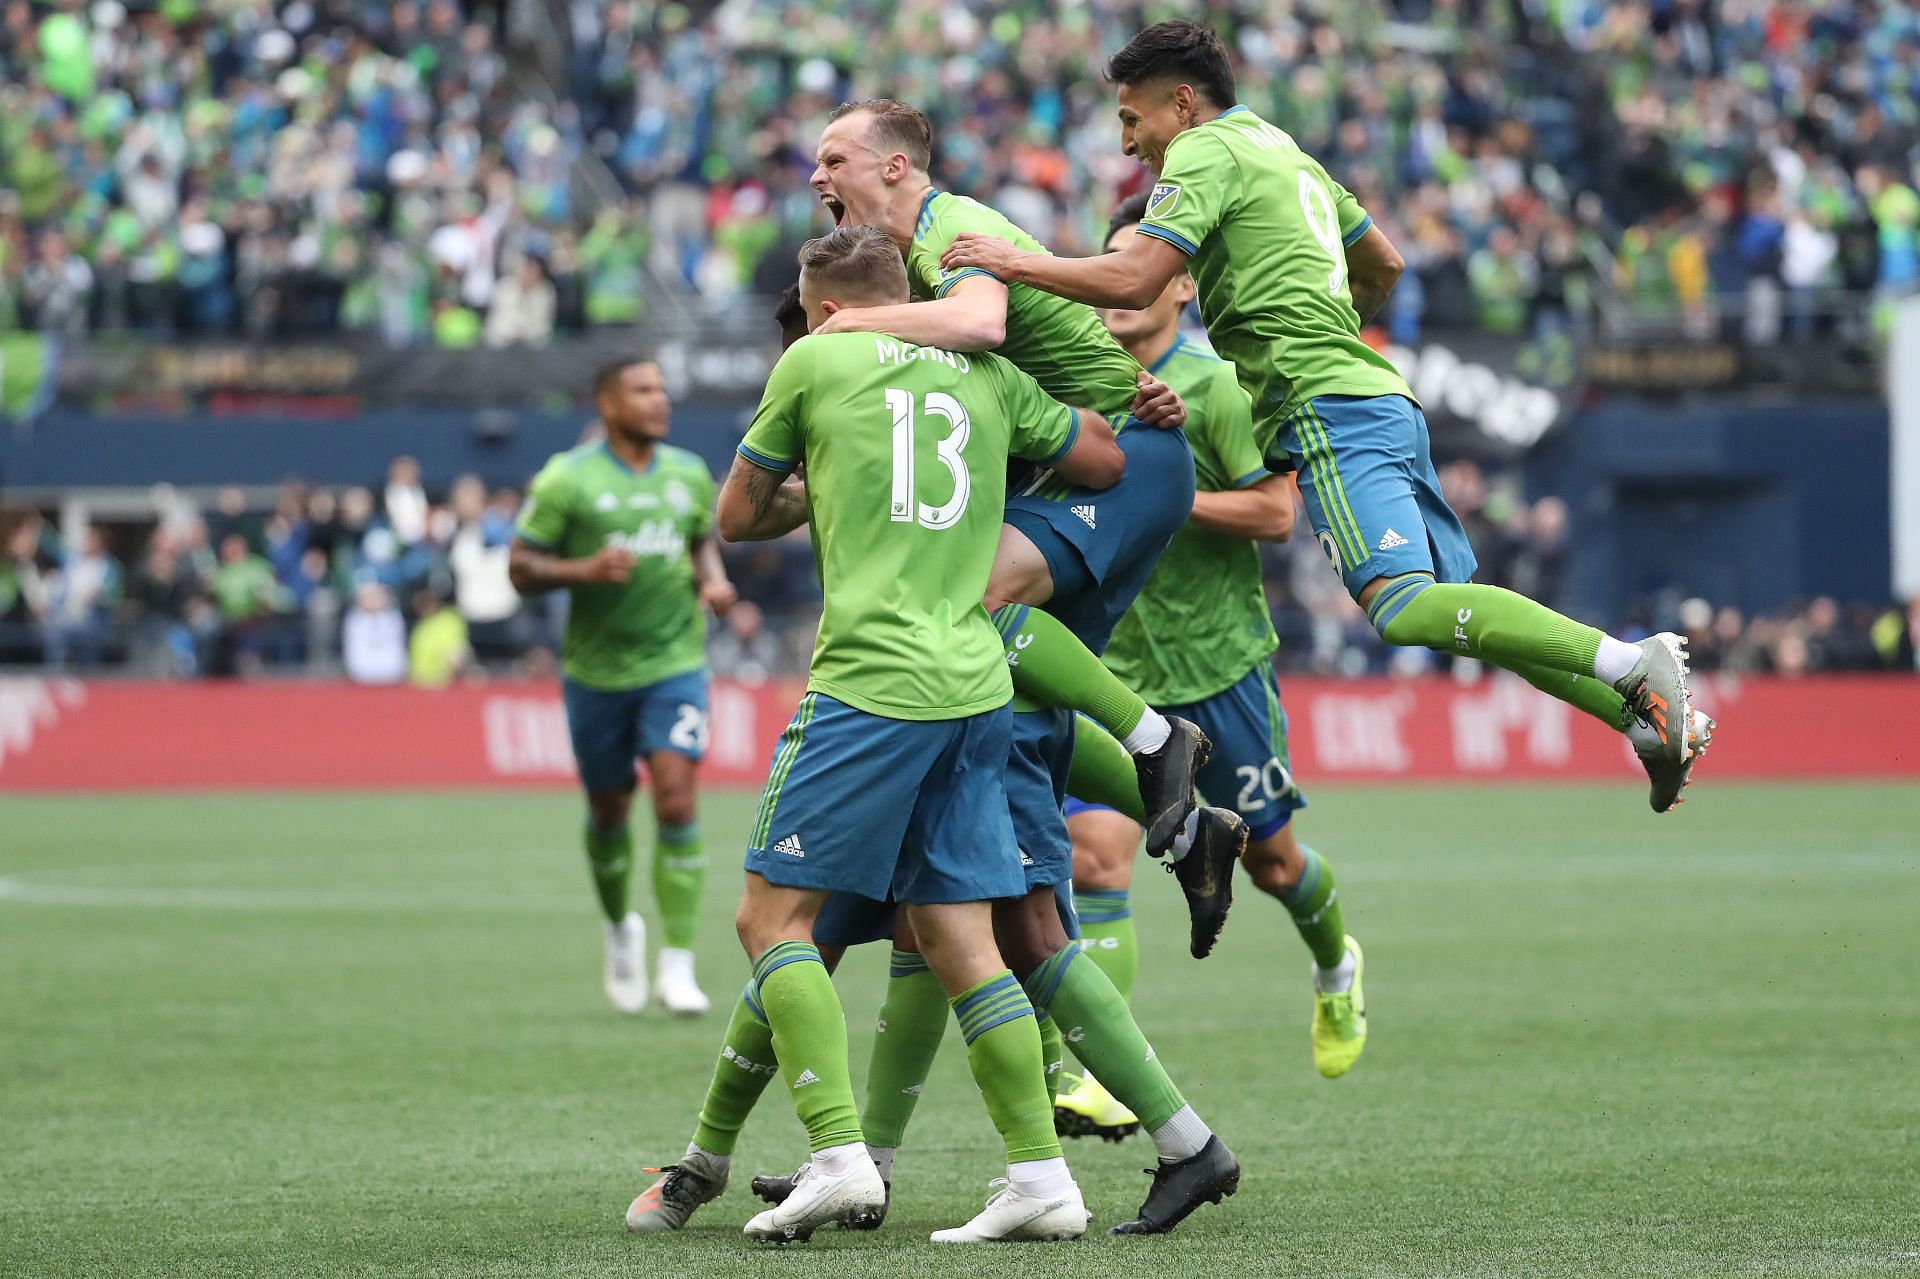 Seattle Sounders take on Toronto FC this weekend